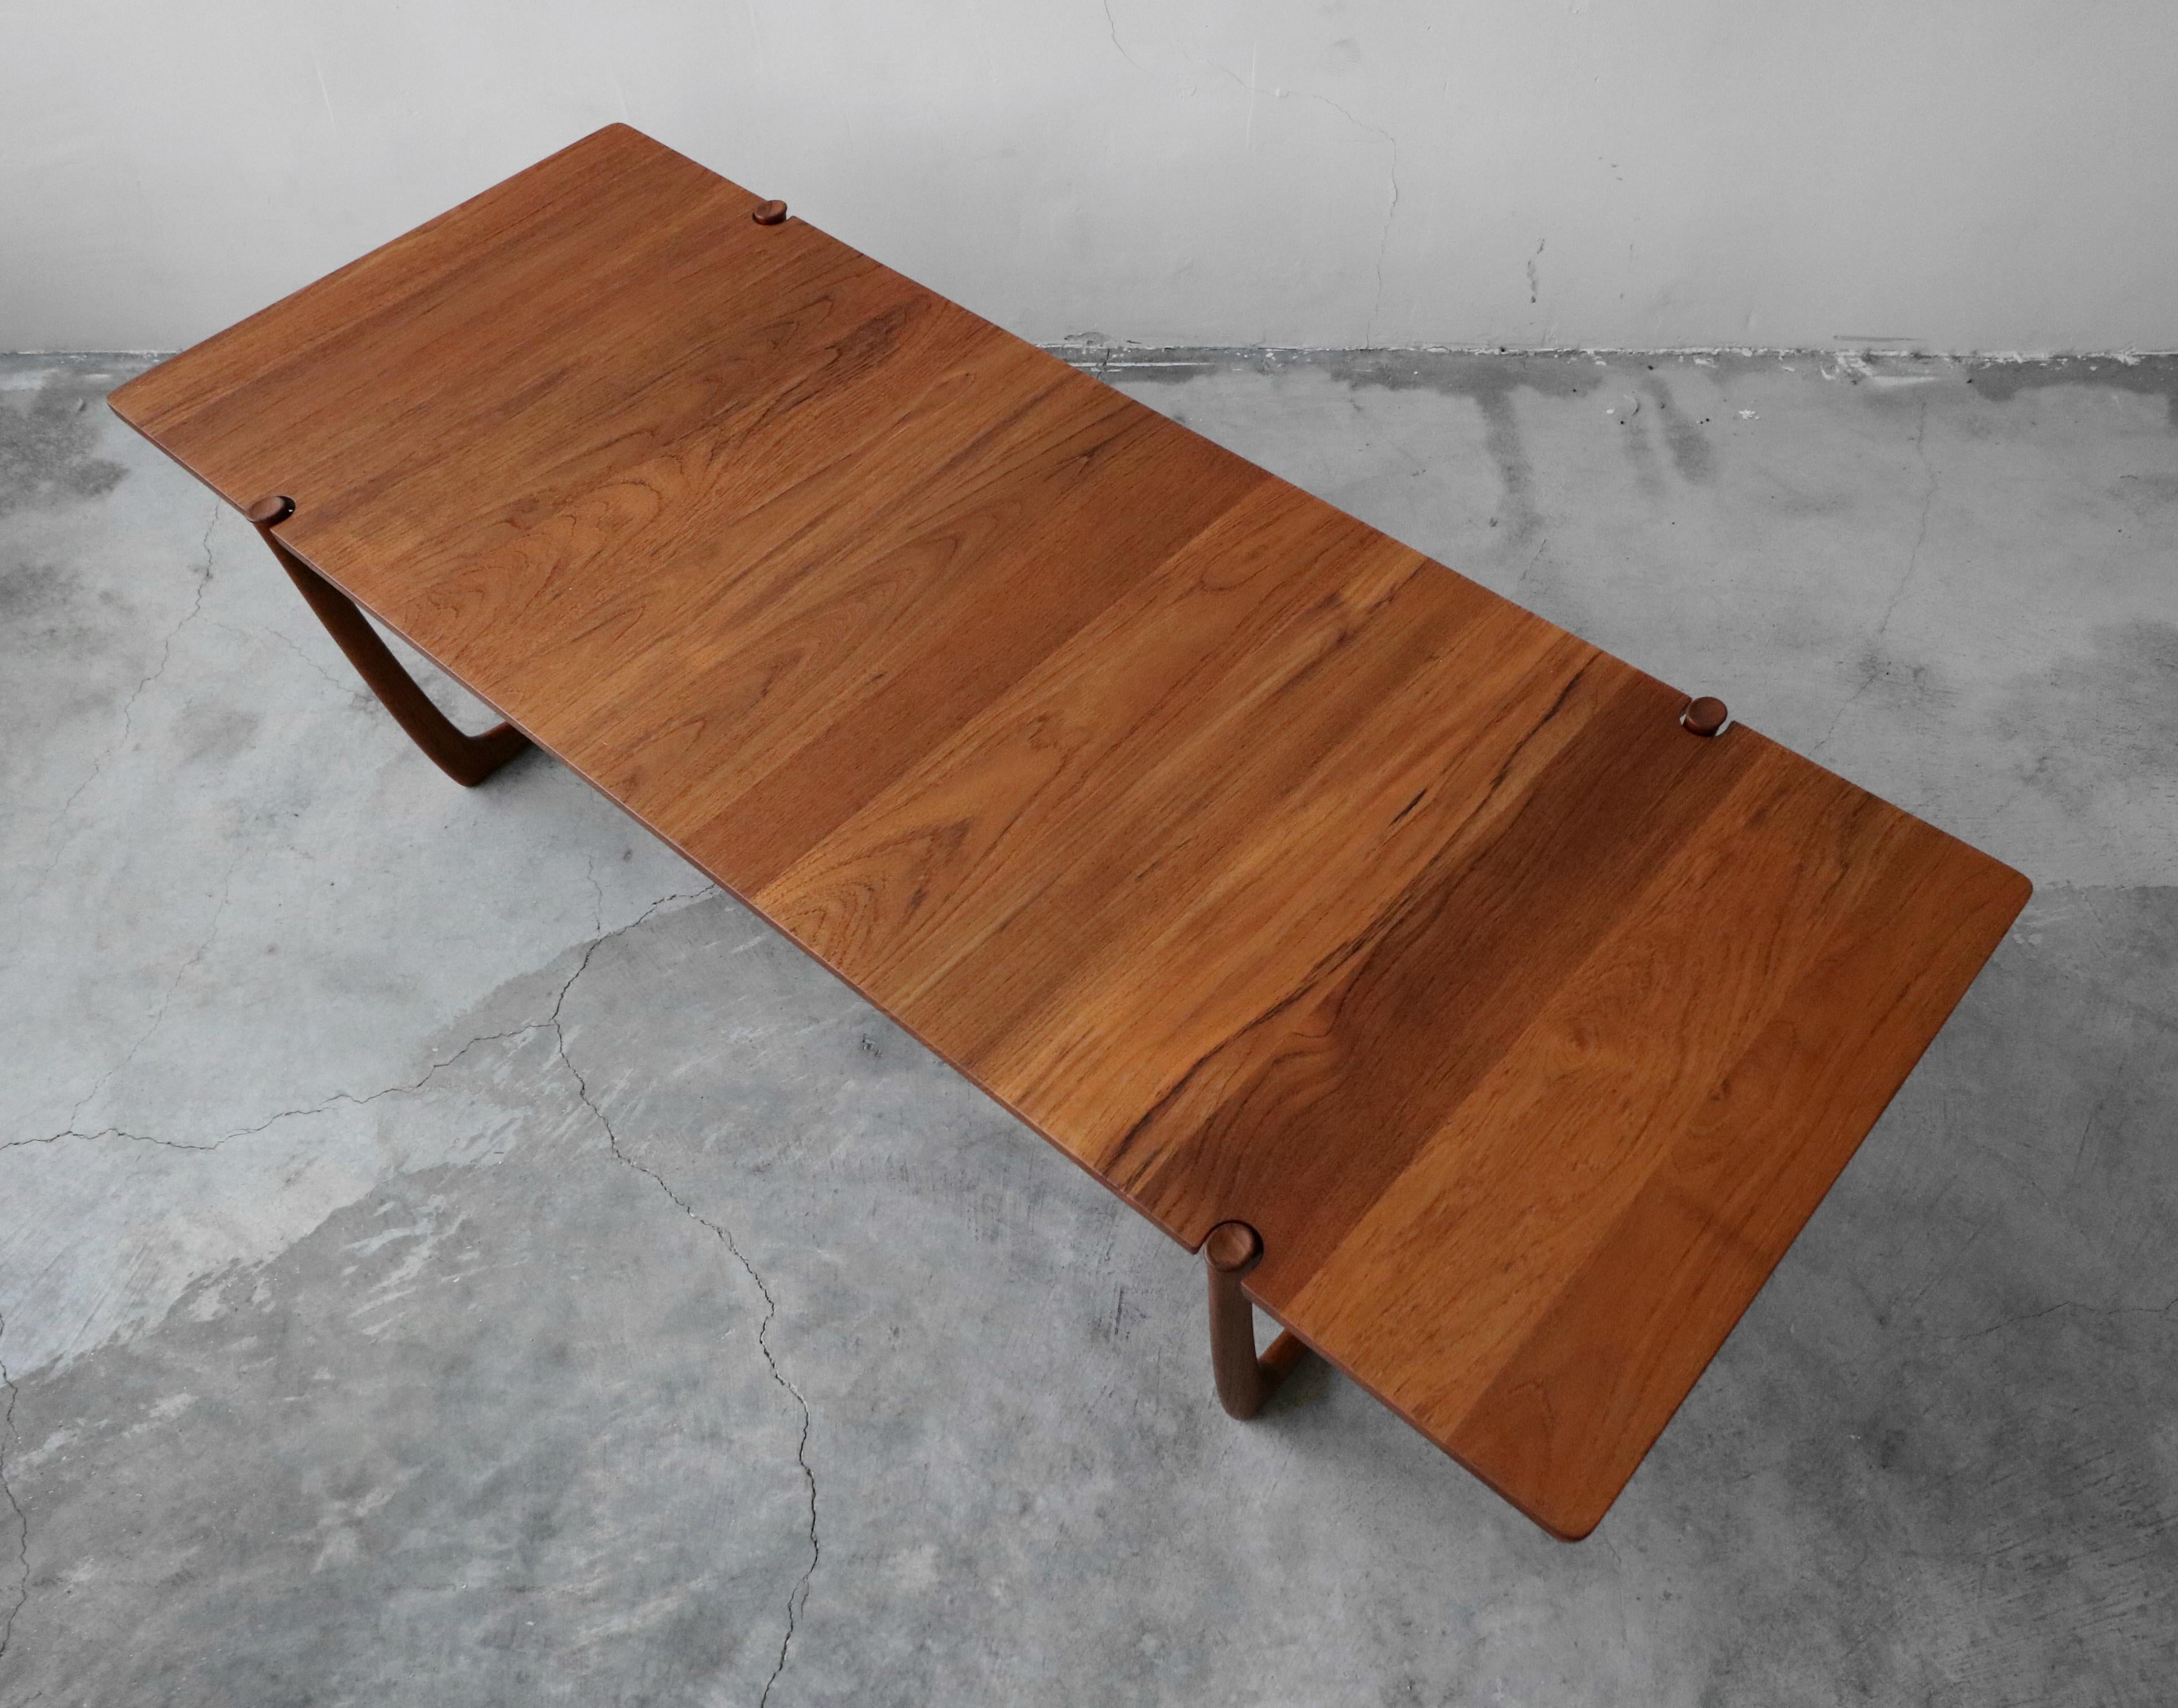 Large solid teak Danish coffee table by Peter Hvidt & Orla Mølgaard-Nielsen for France & Son, distributed by John Stuart. This coffee table is a great example of fine Danish craftsmanship. 2 beautifully detailed, sleigh style legs are notched in to